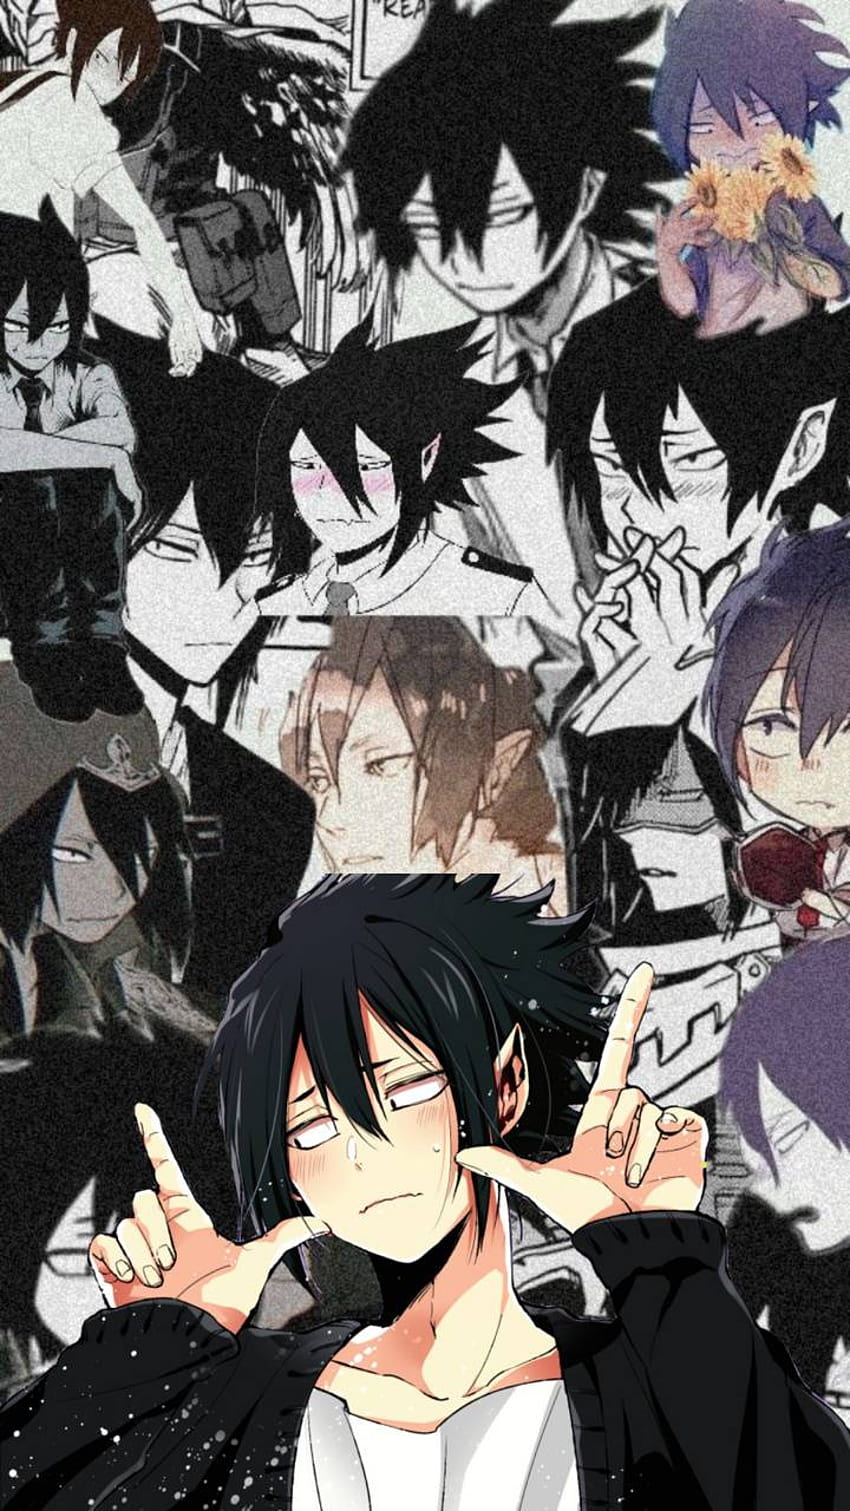 Tamaki Amajiki Wallpaper | Aesthetic Pictures to Use | Quotev